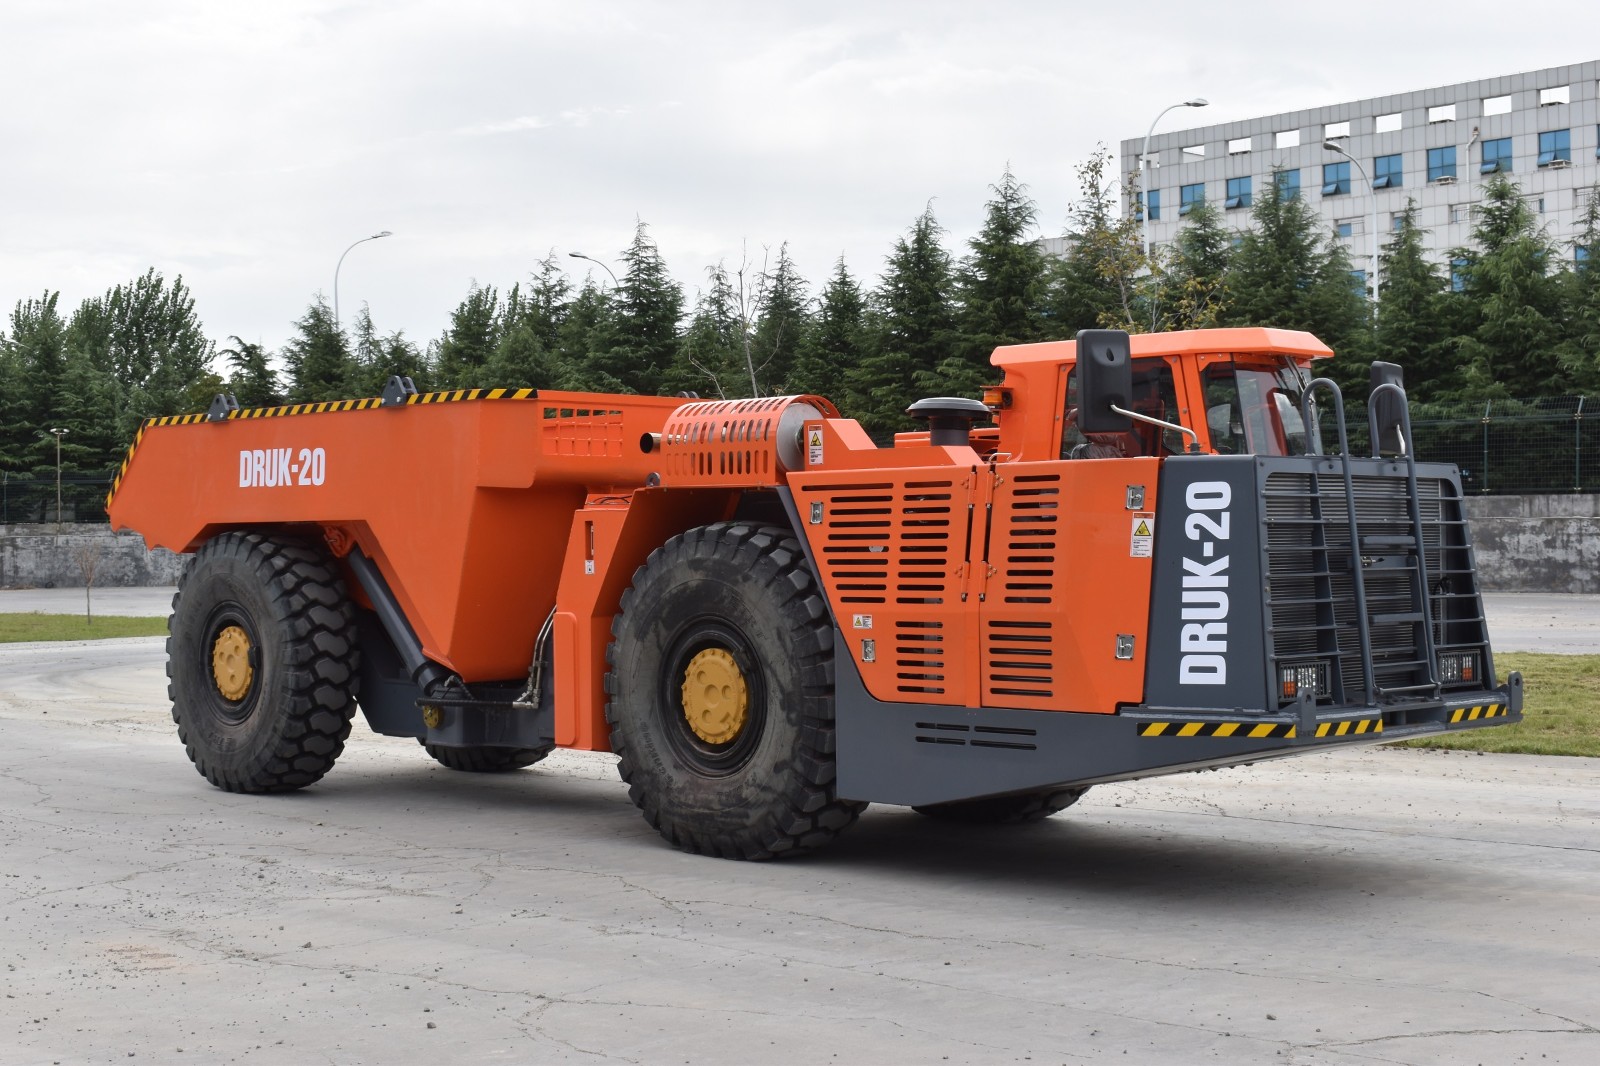 DERUI launch the new generation of  underground truck with 20 ton payload